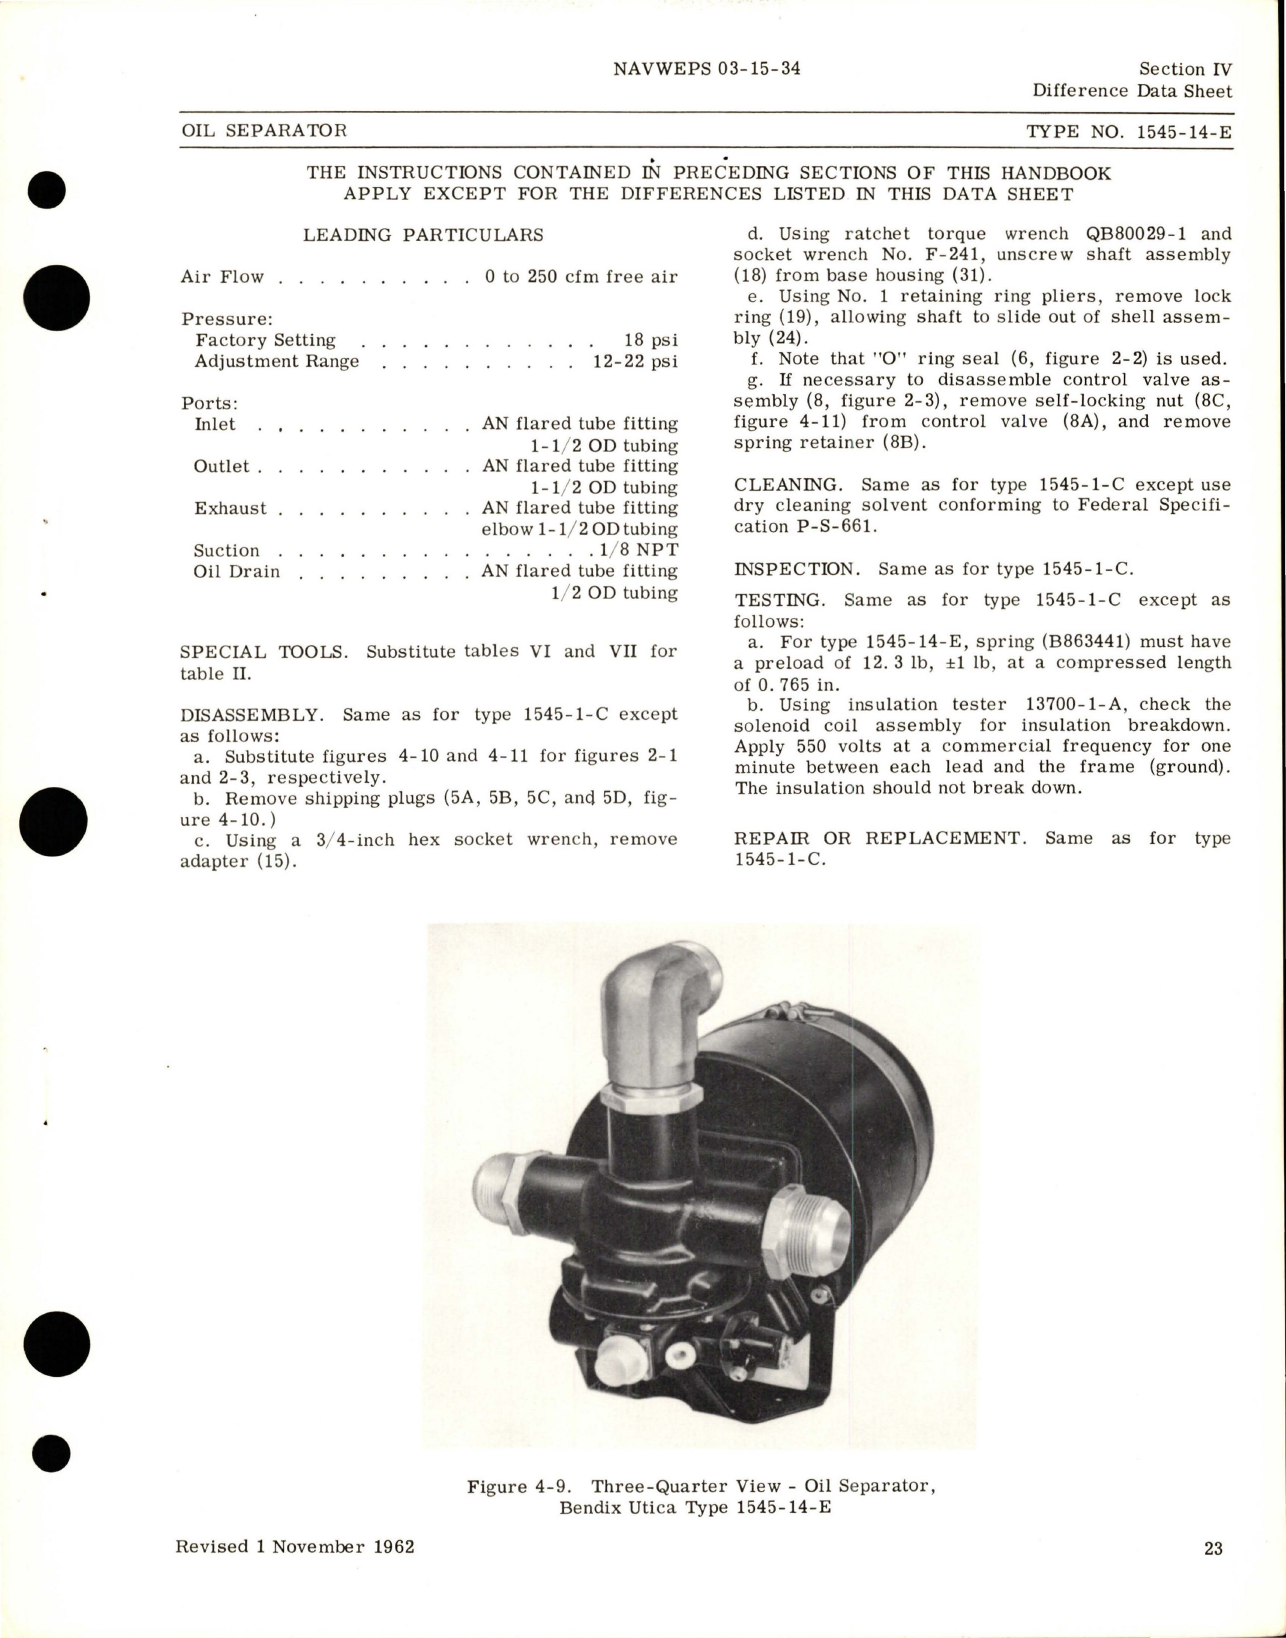 Sample page 5 from AirCorps Library document: Overhaul Instructions for Oil Separator